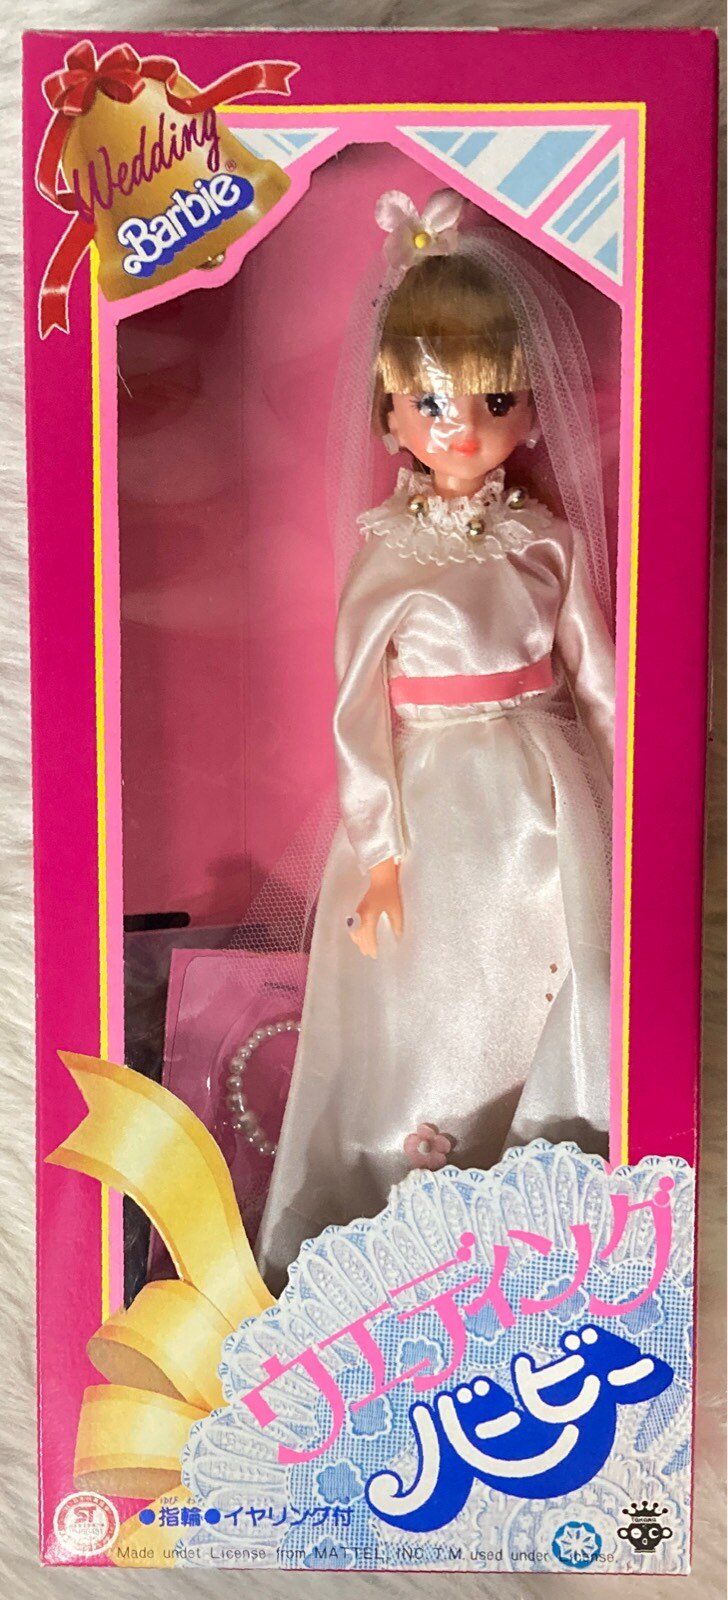 Amazon.co.jp: Wedding Bride Barbie with Twinkling Ring - 2006 : Toys & Games